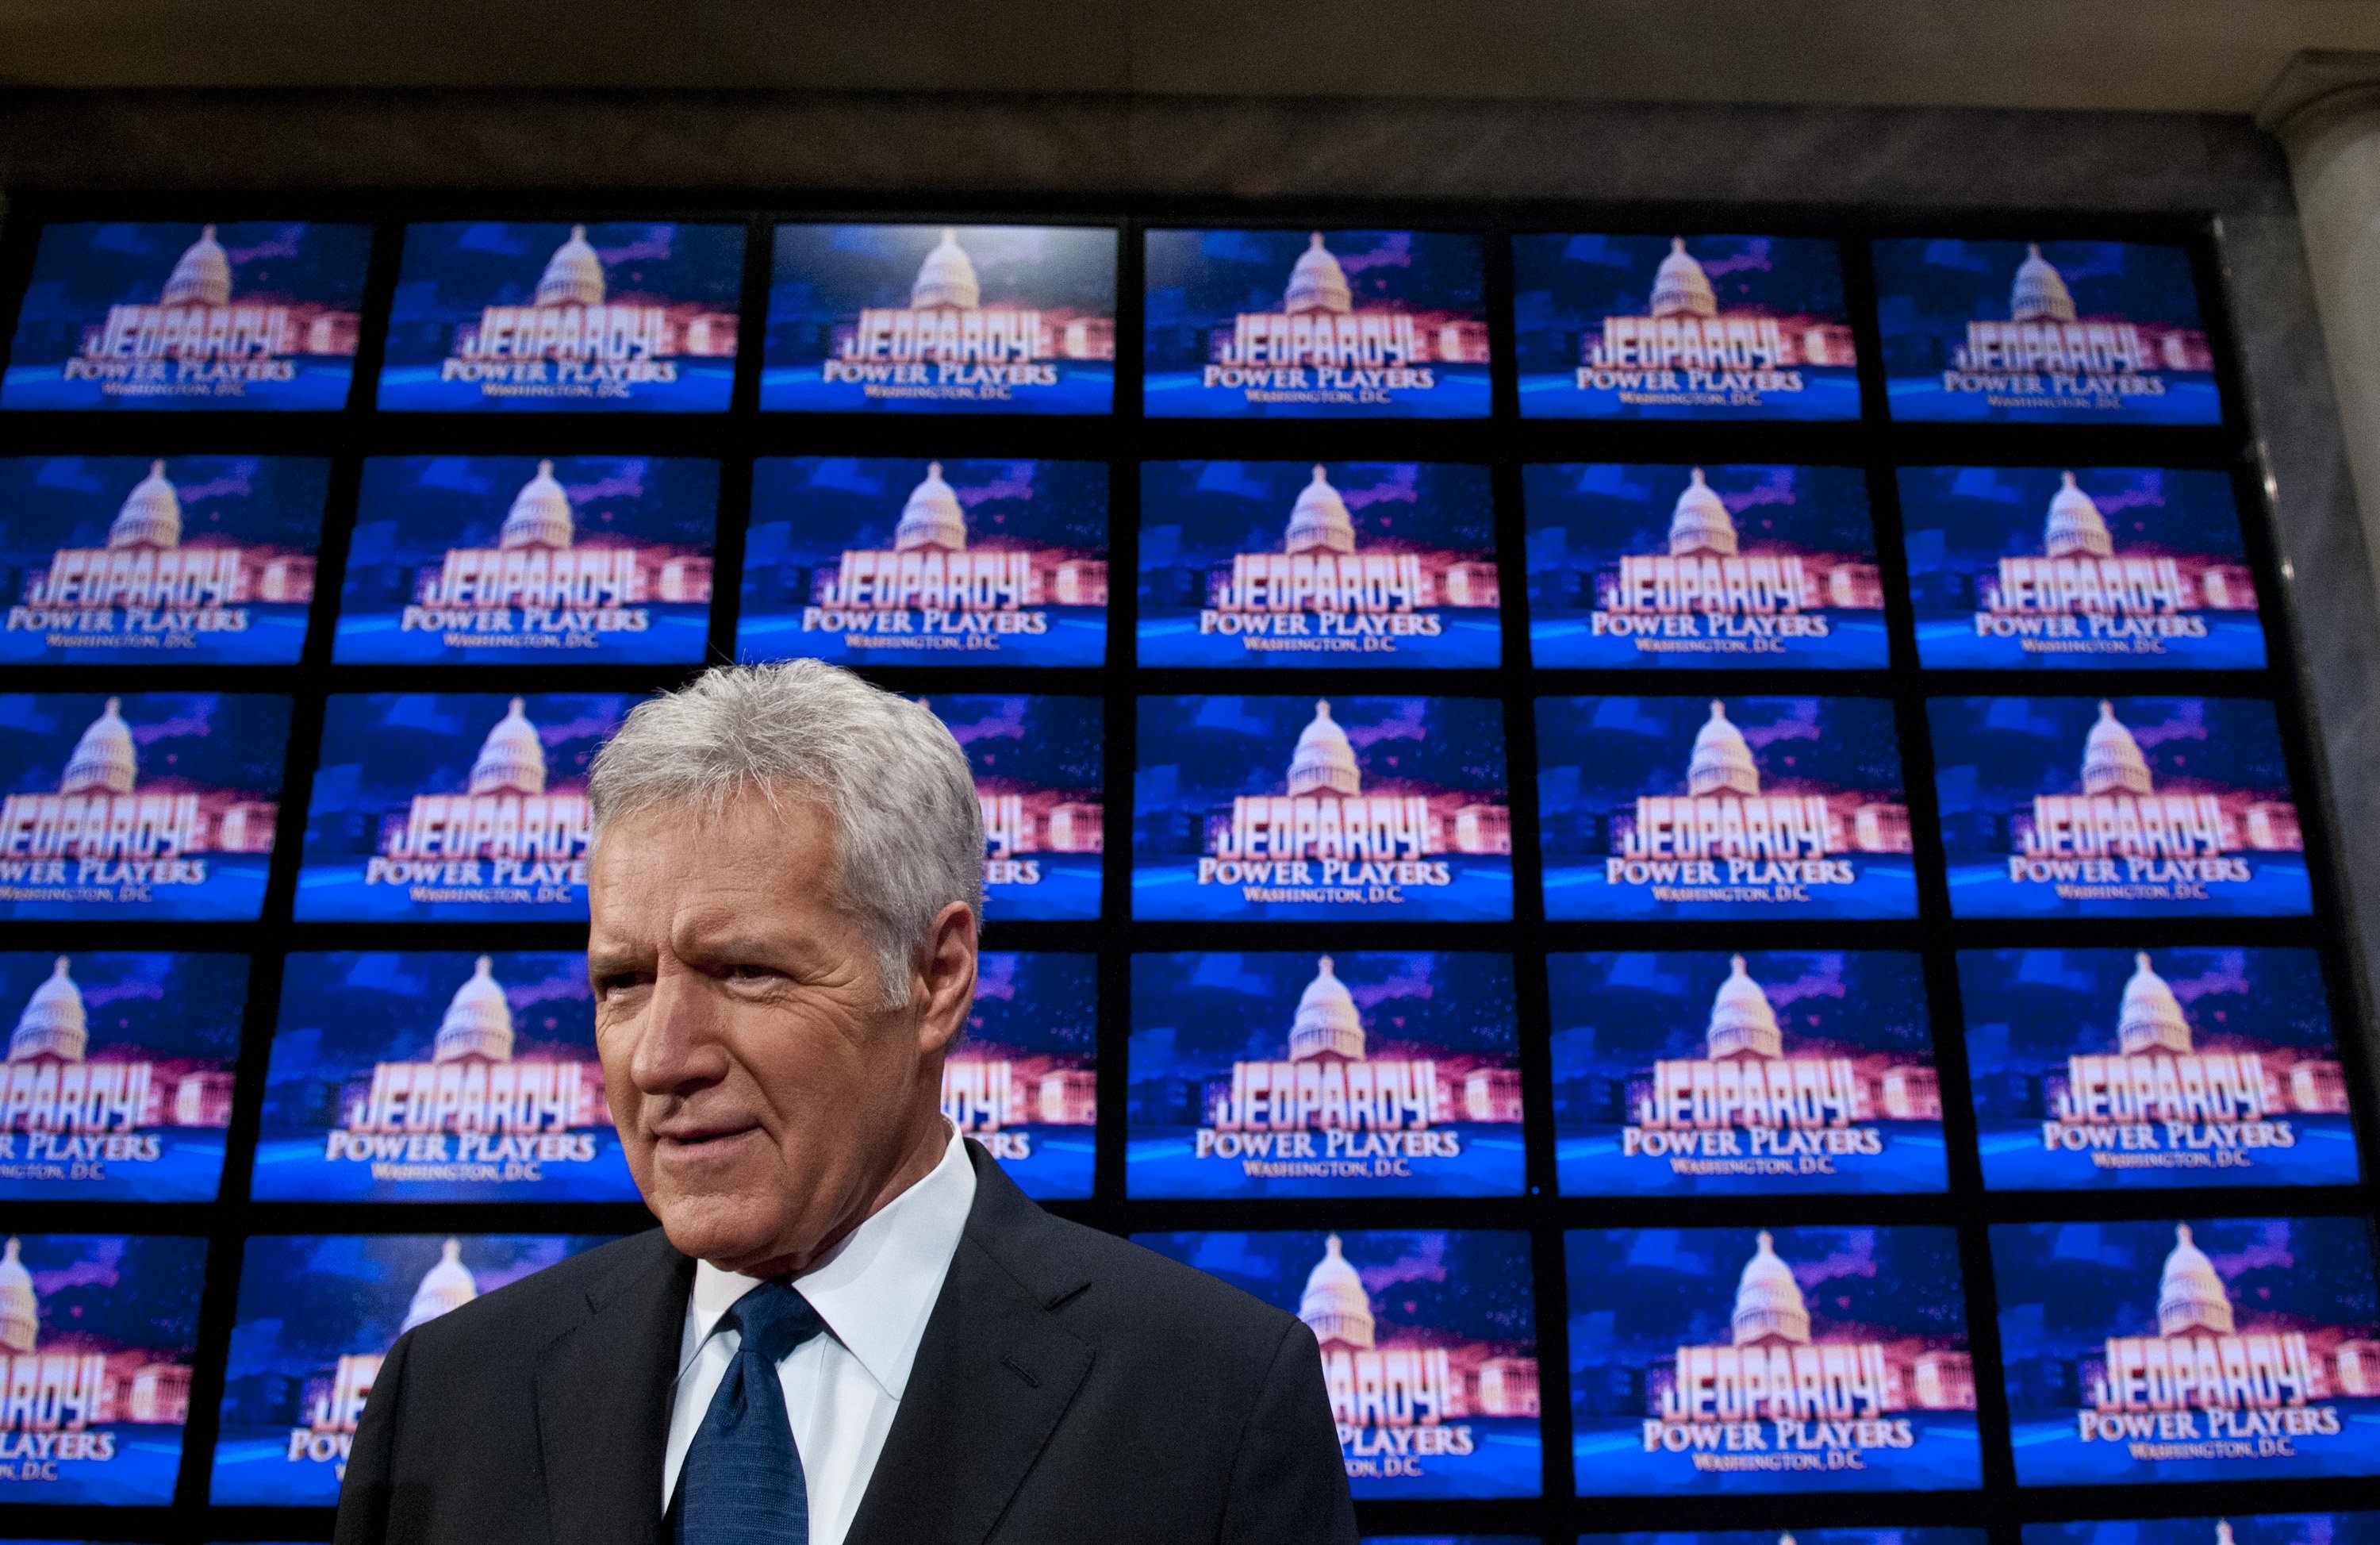 Alex Trebek speaks during a rehearsal before a taping of Jeopardy! | Photo: GettyImages